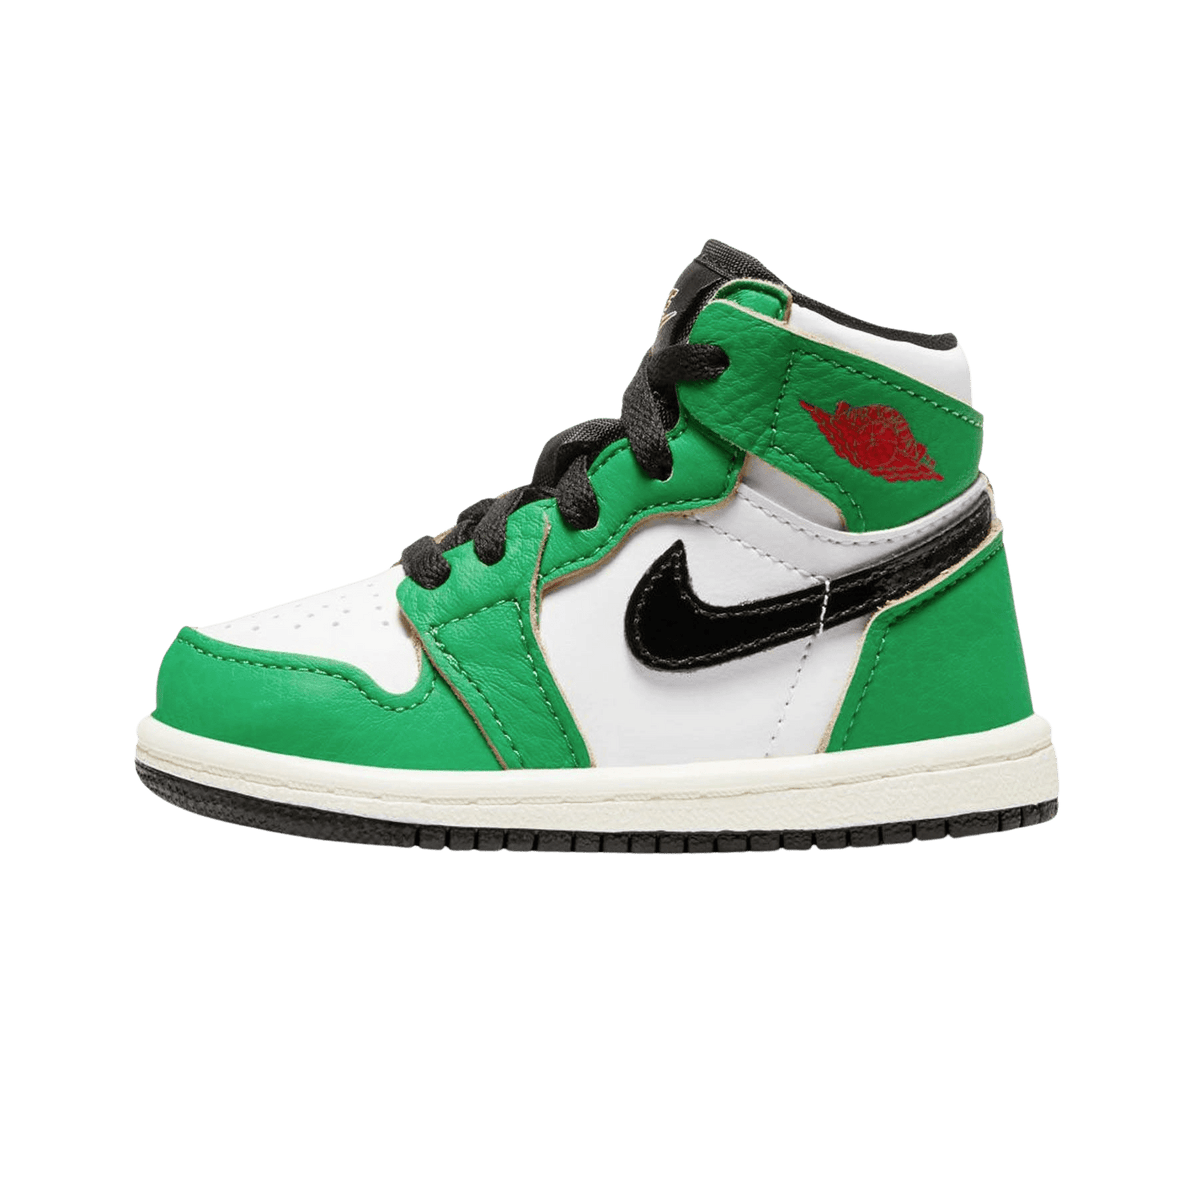 nike air boom price in africa south africa today Retro High OG TD 'Lucky Green' - JuzsportsShops